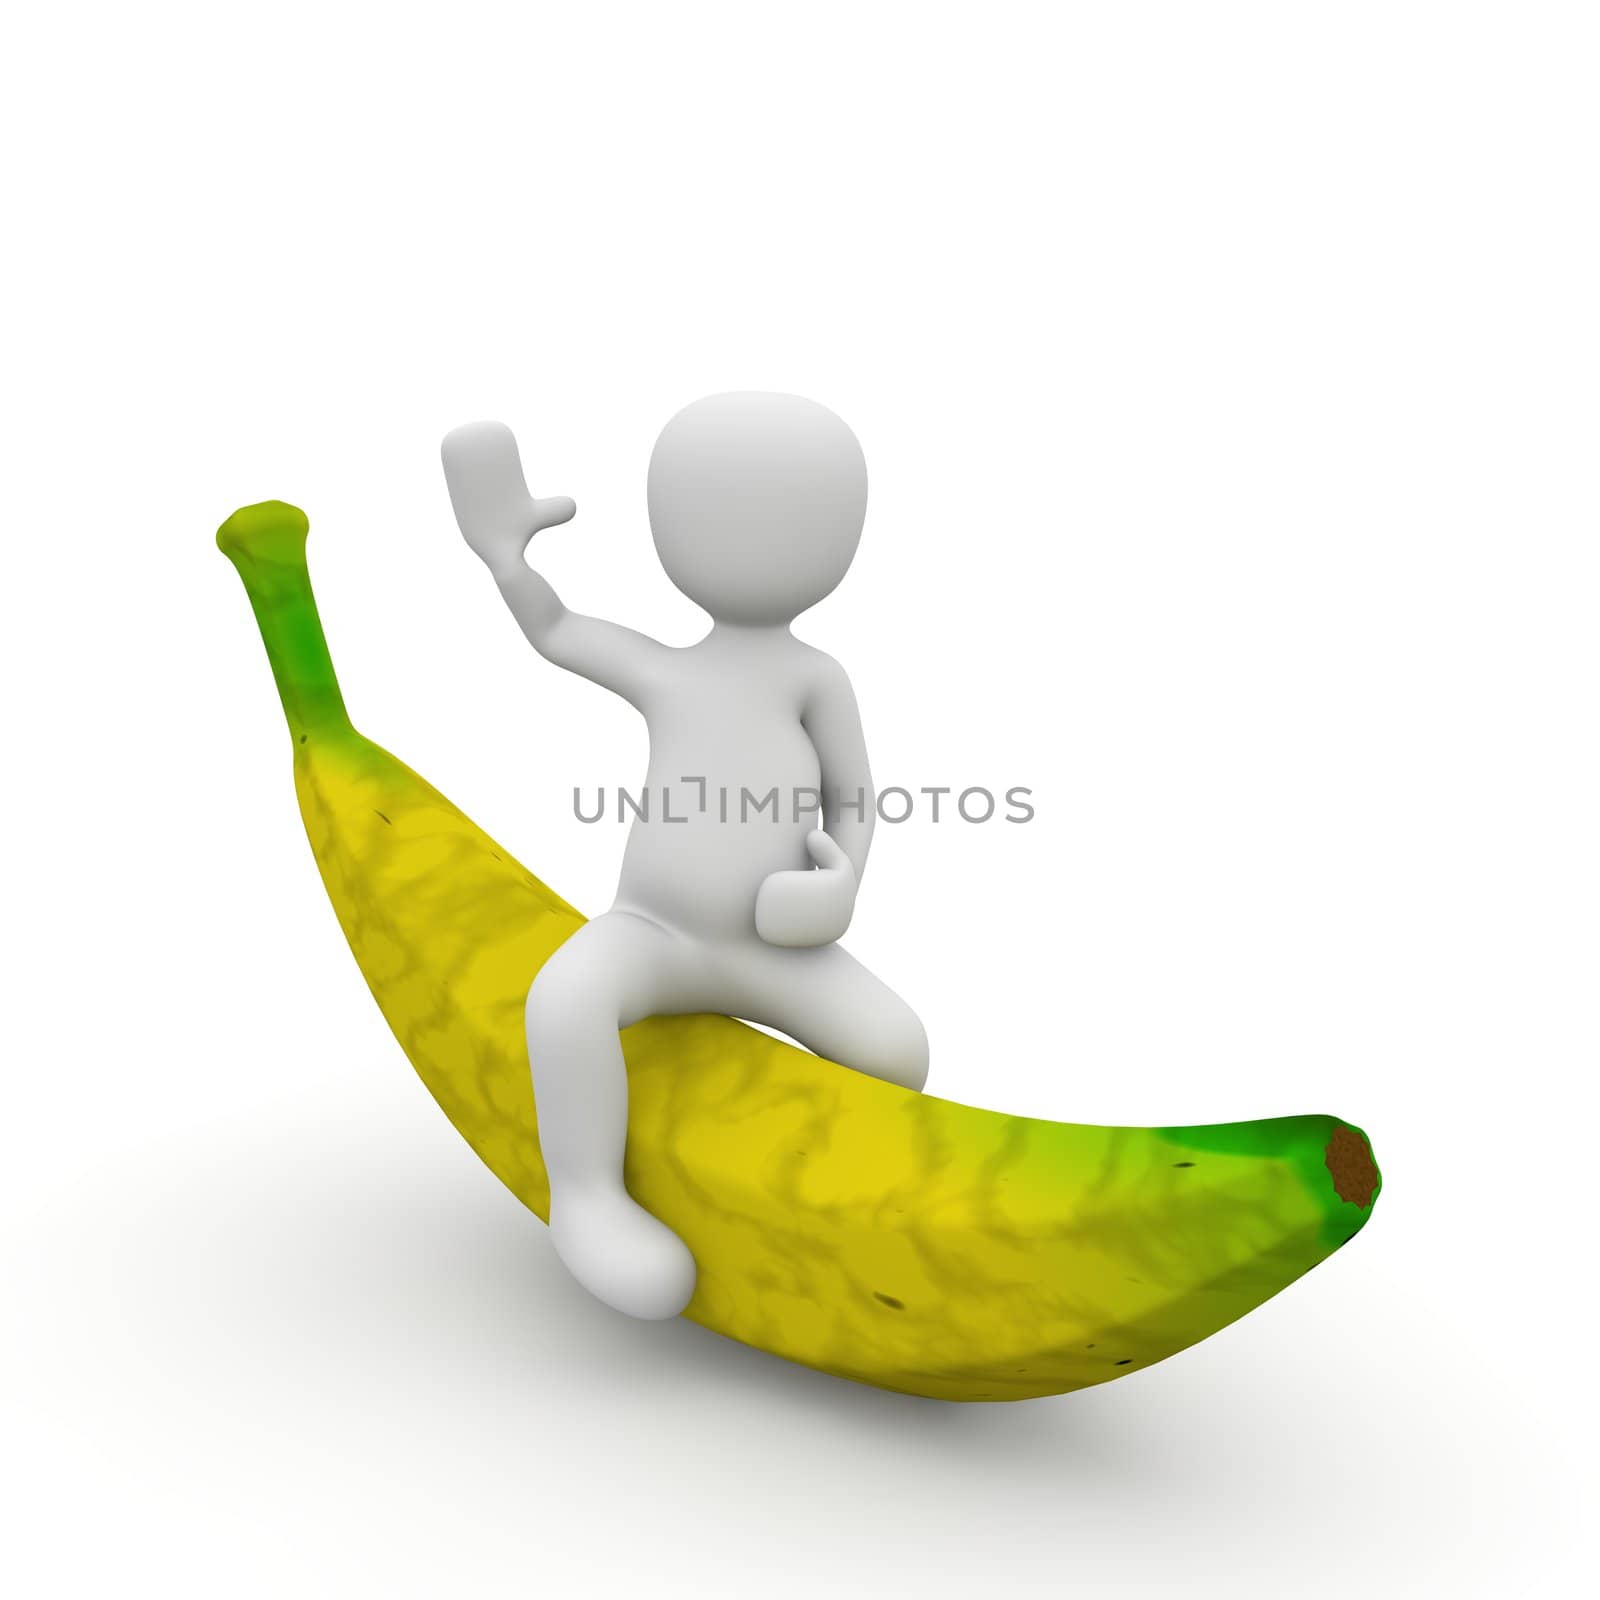 The ride on the banana is dangerous but very healthy